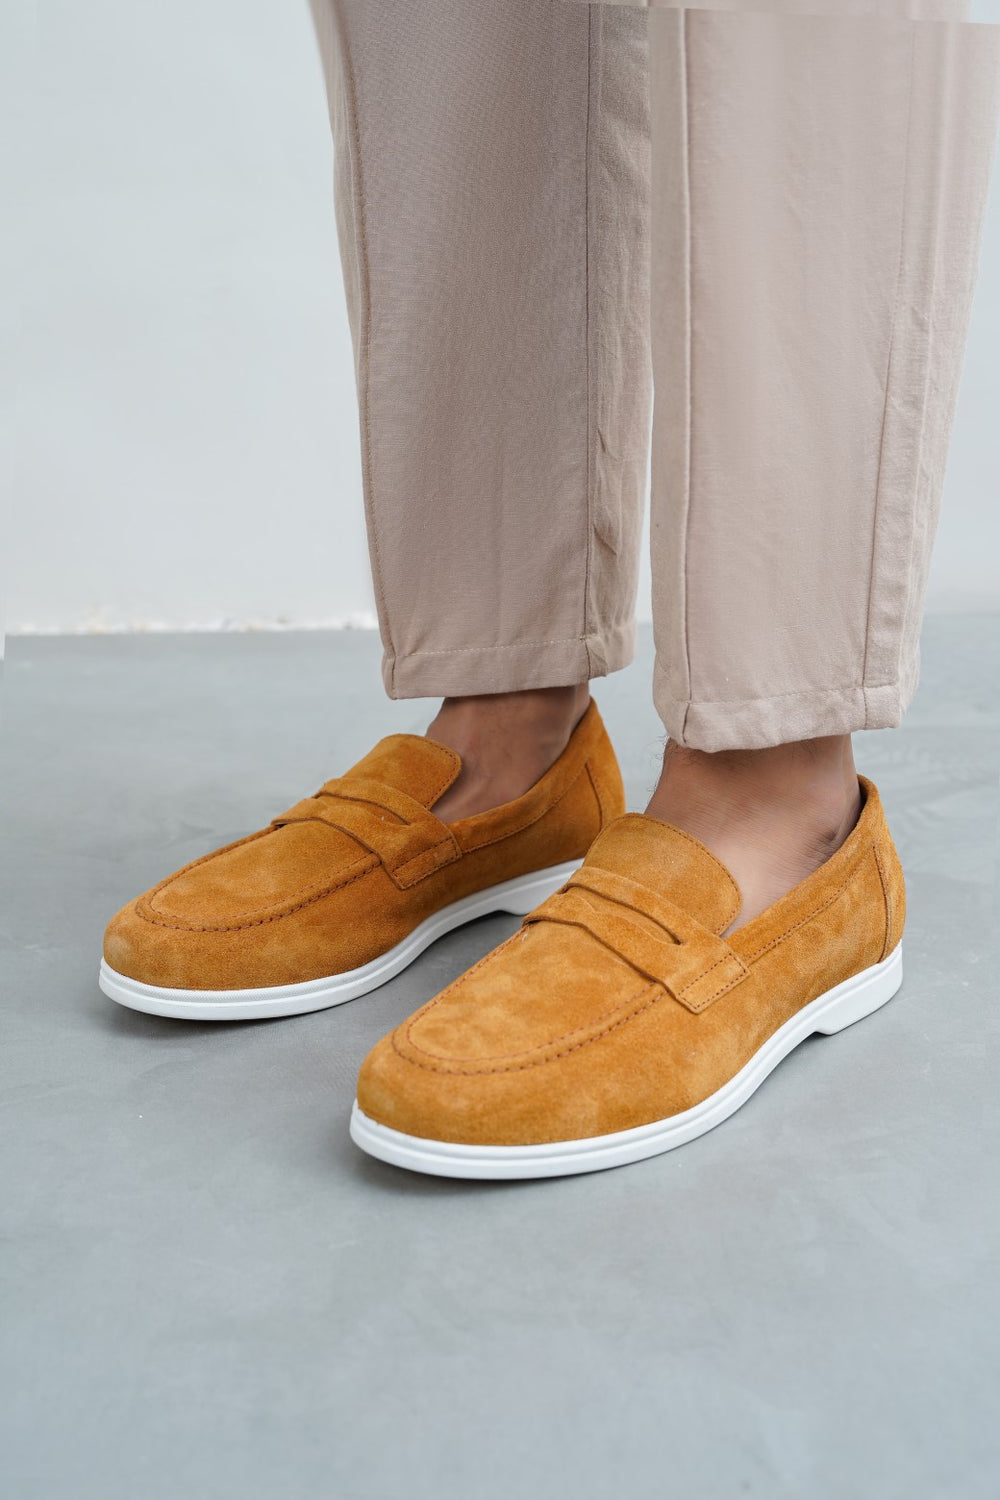 HONEY LEATHER LOAFERS